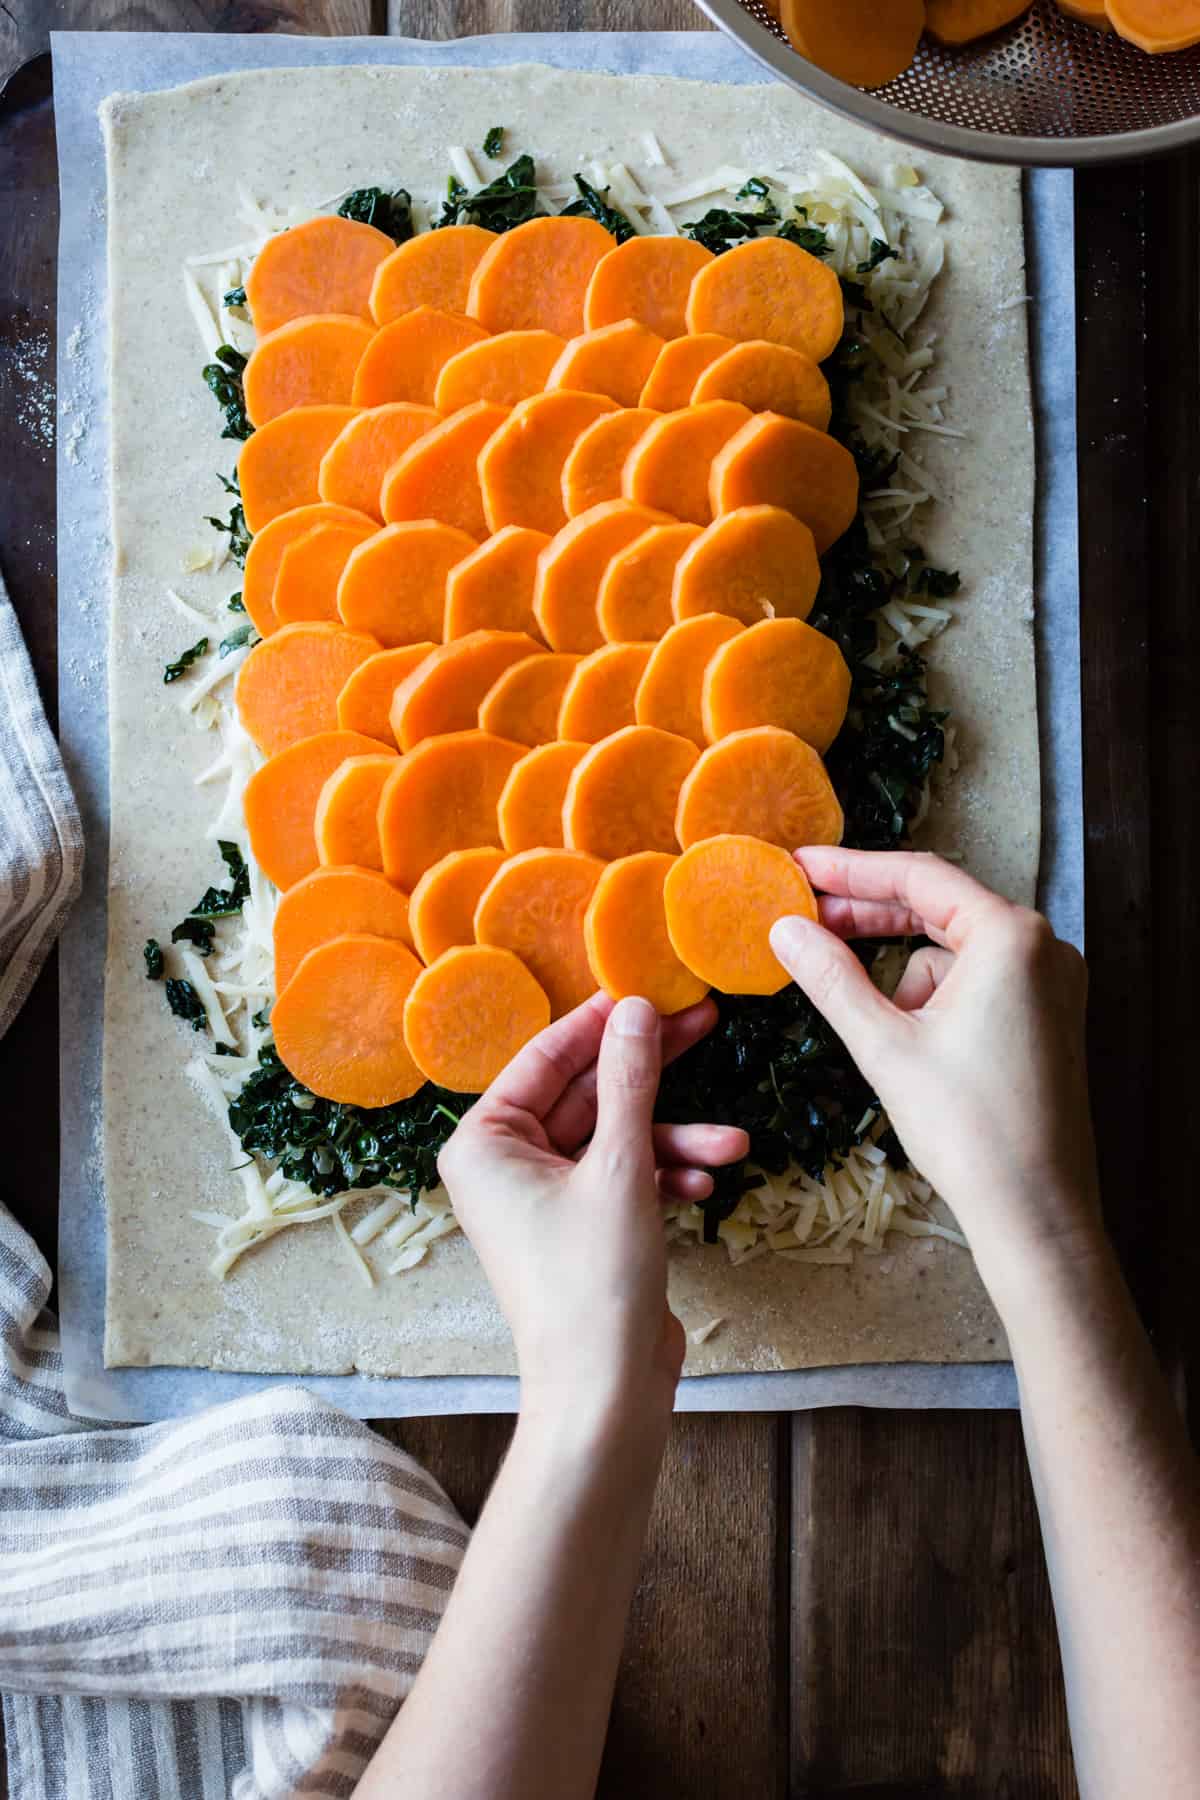 hands are arranging sweet potato slices over the kale